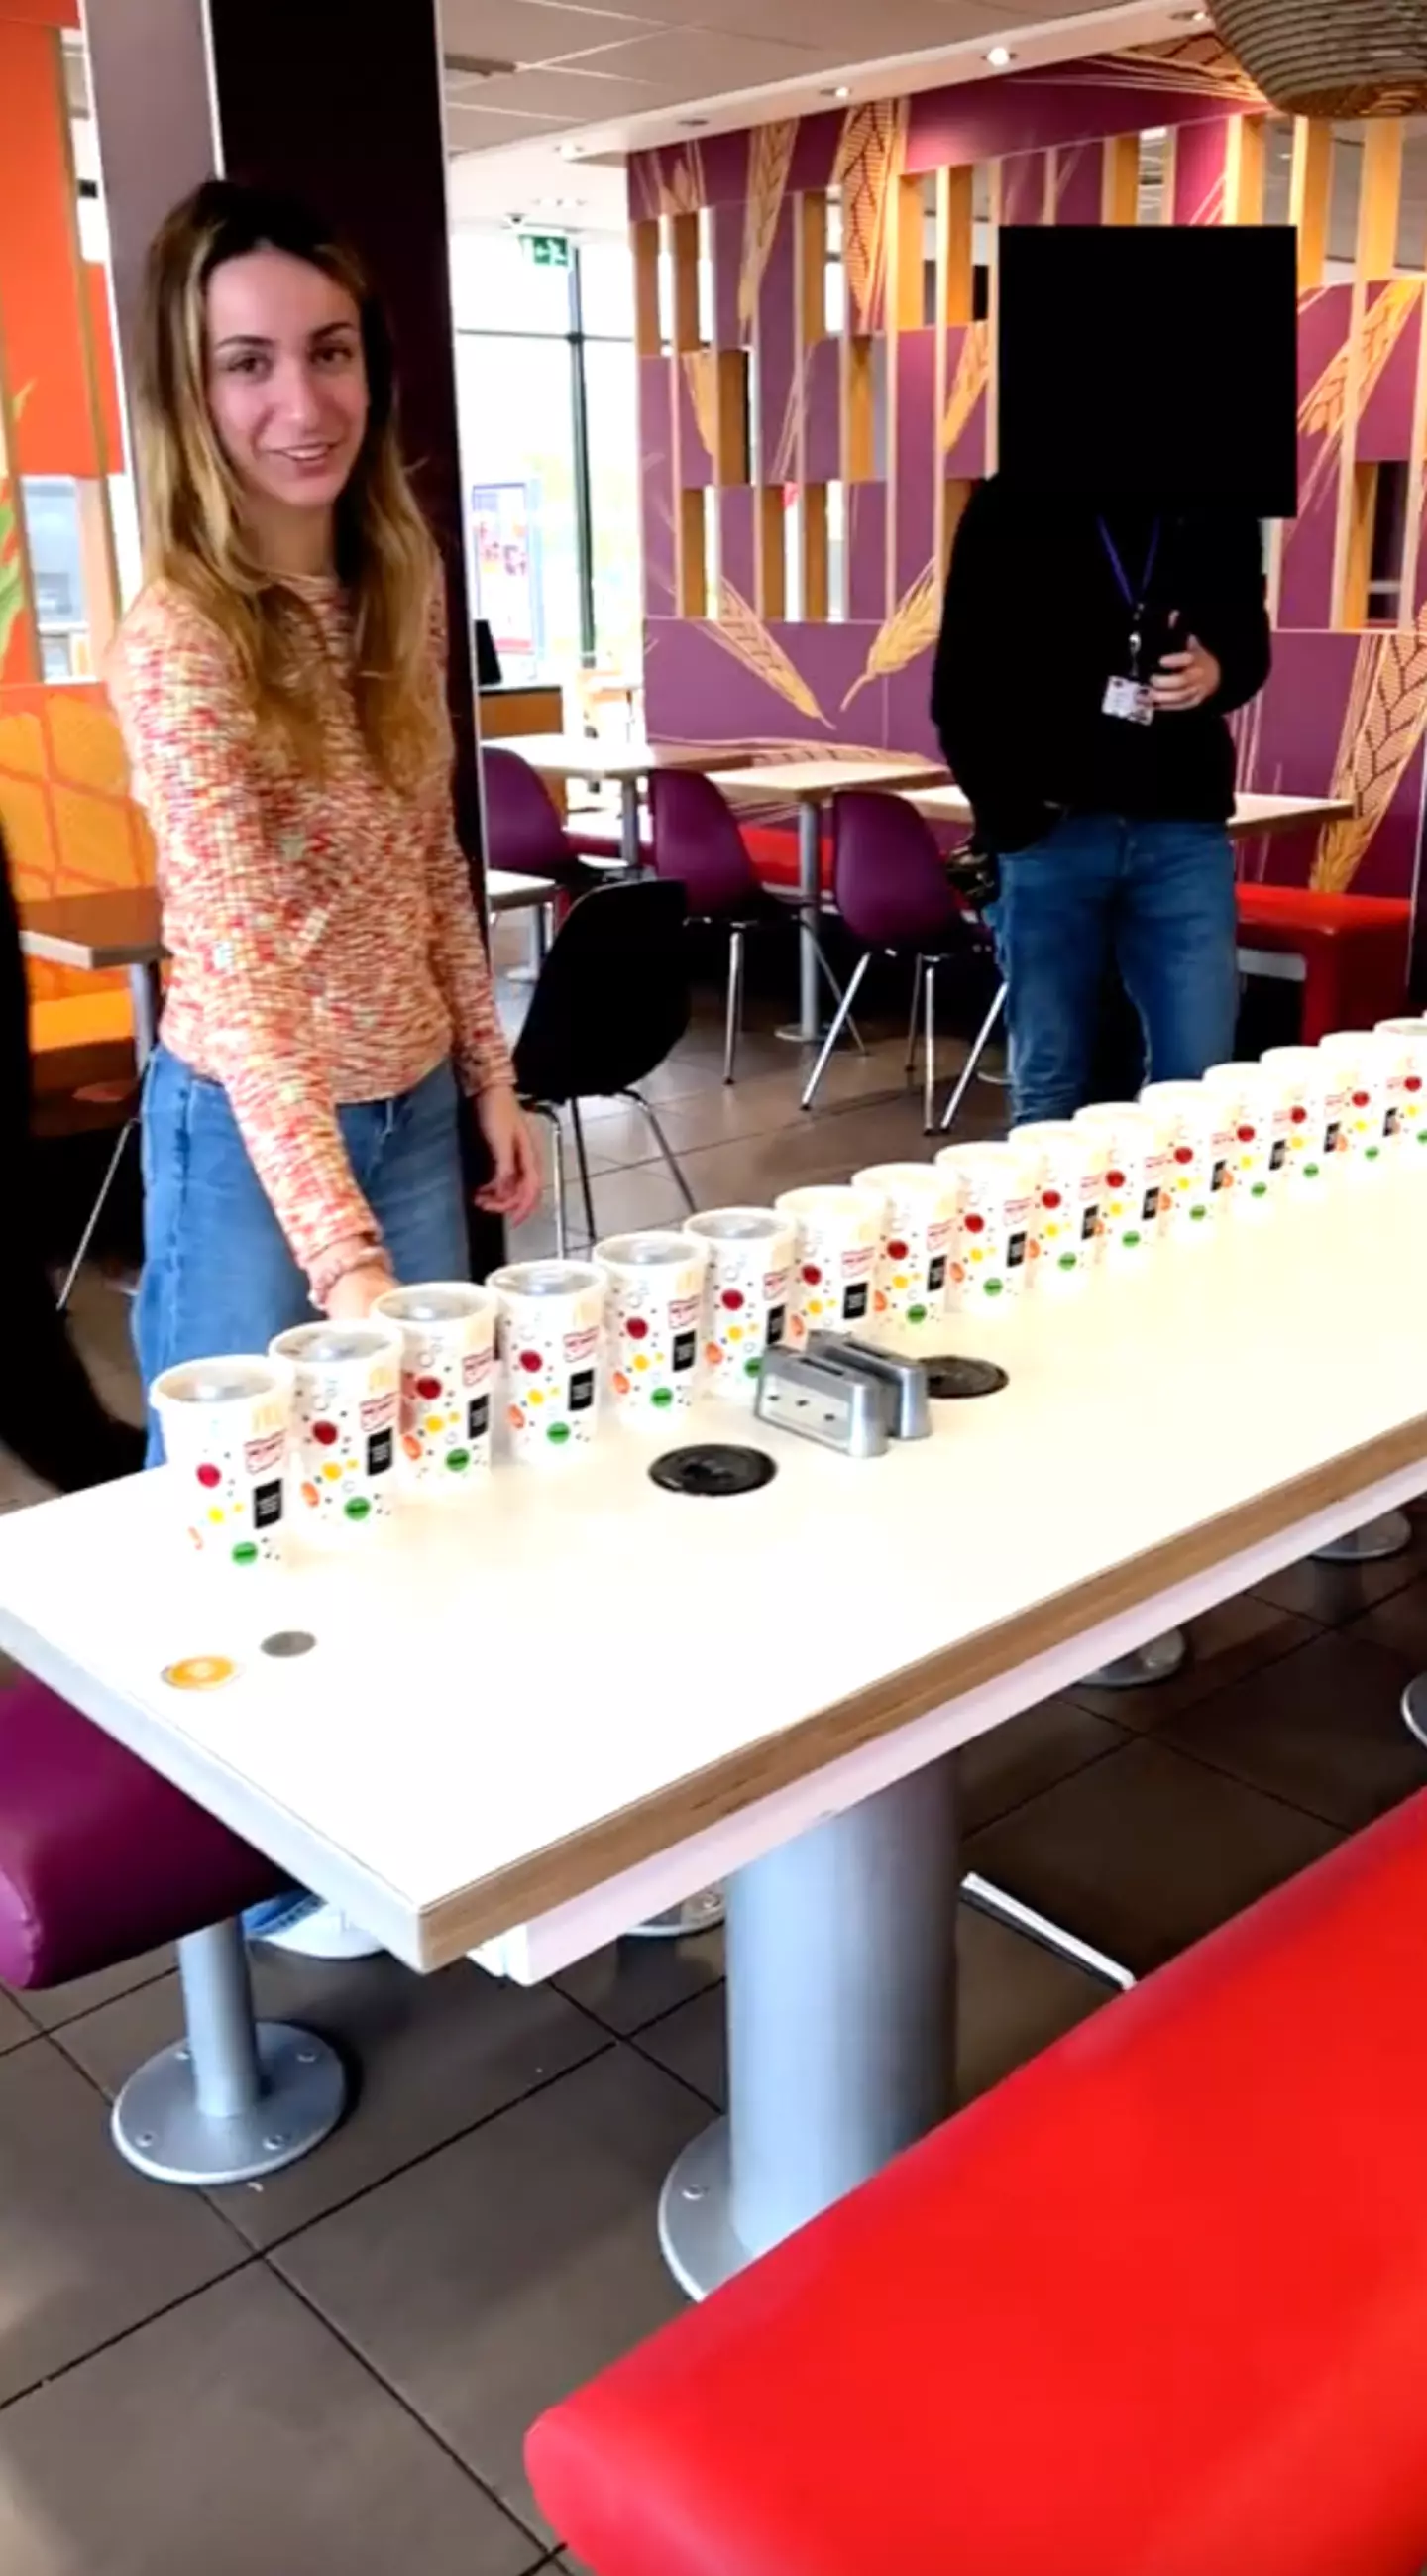 One lad tried his chances at winning a cash prize in the new McDonald's game.